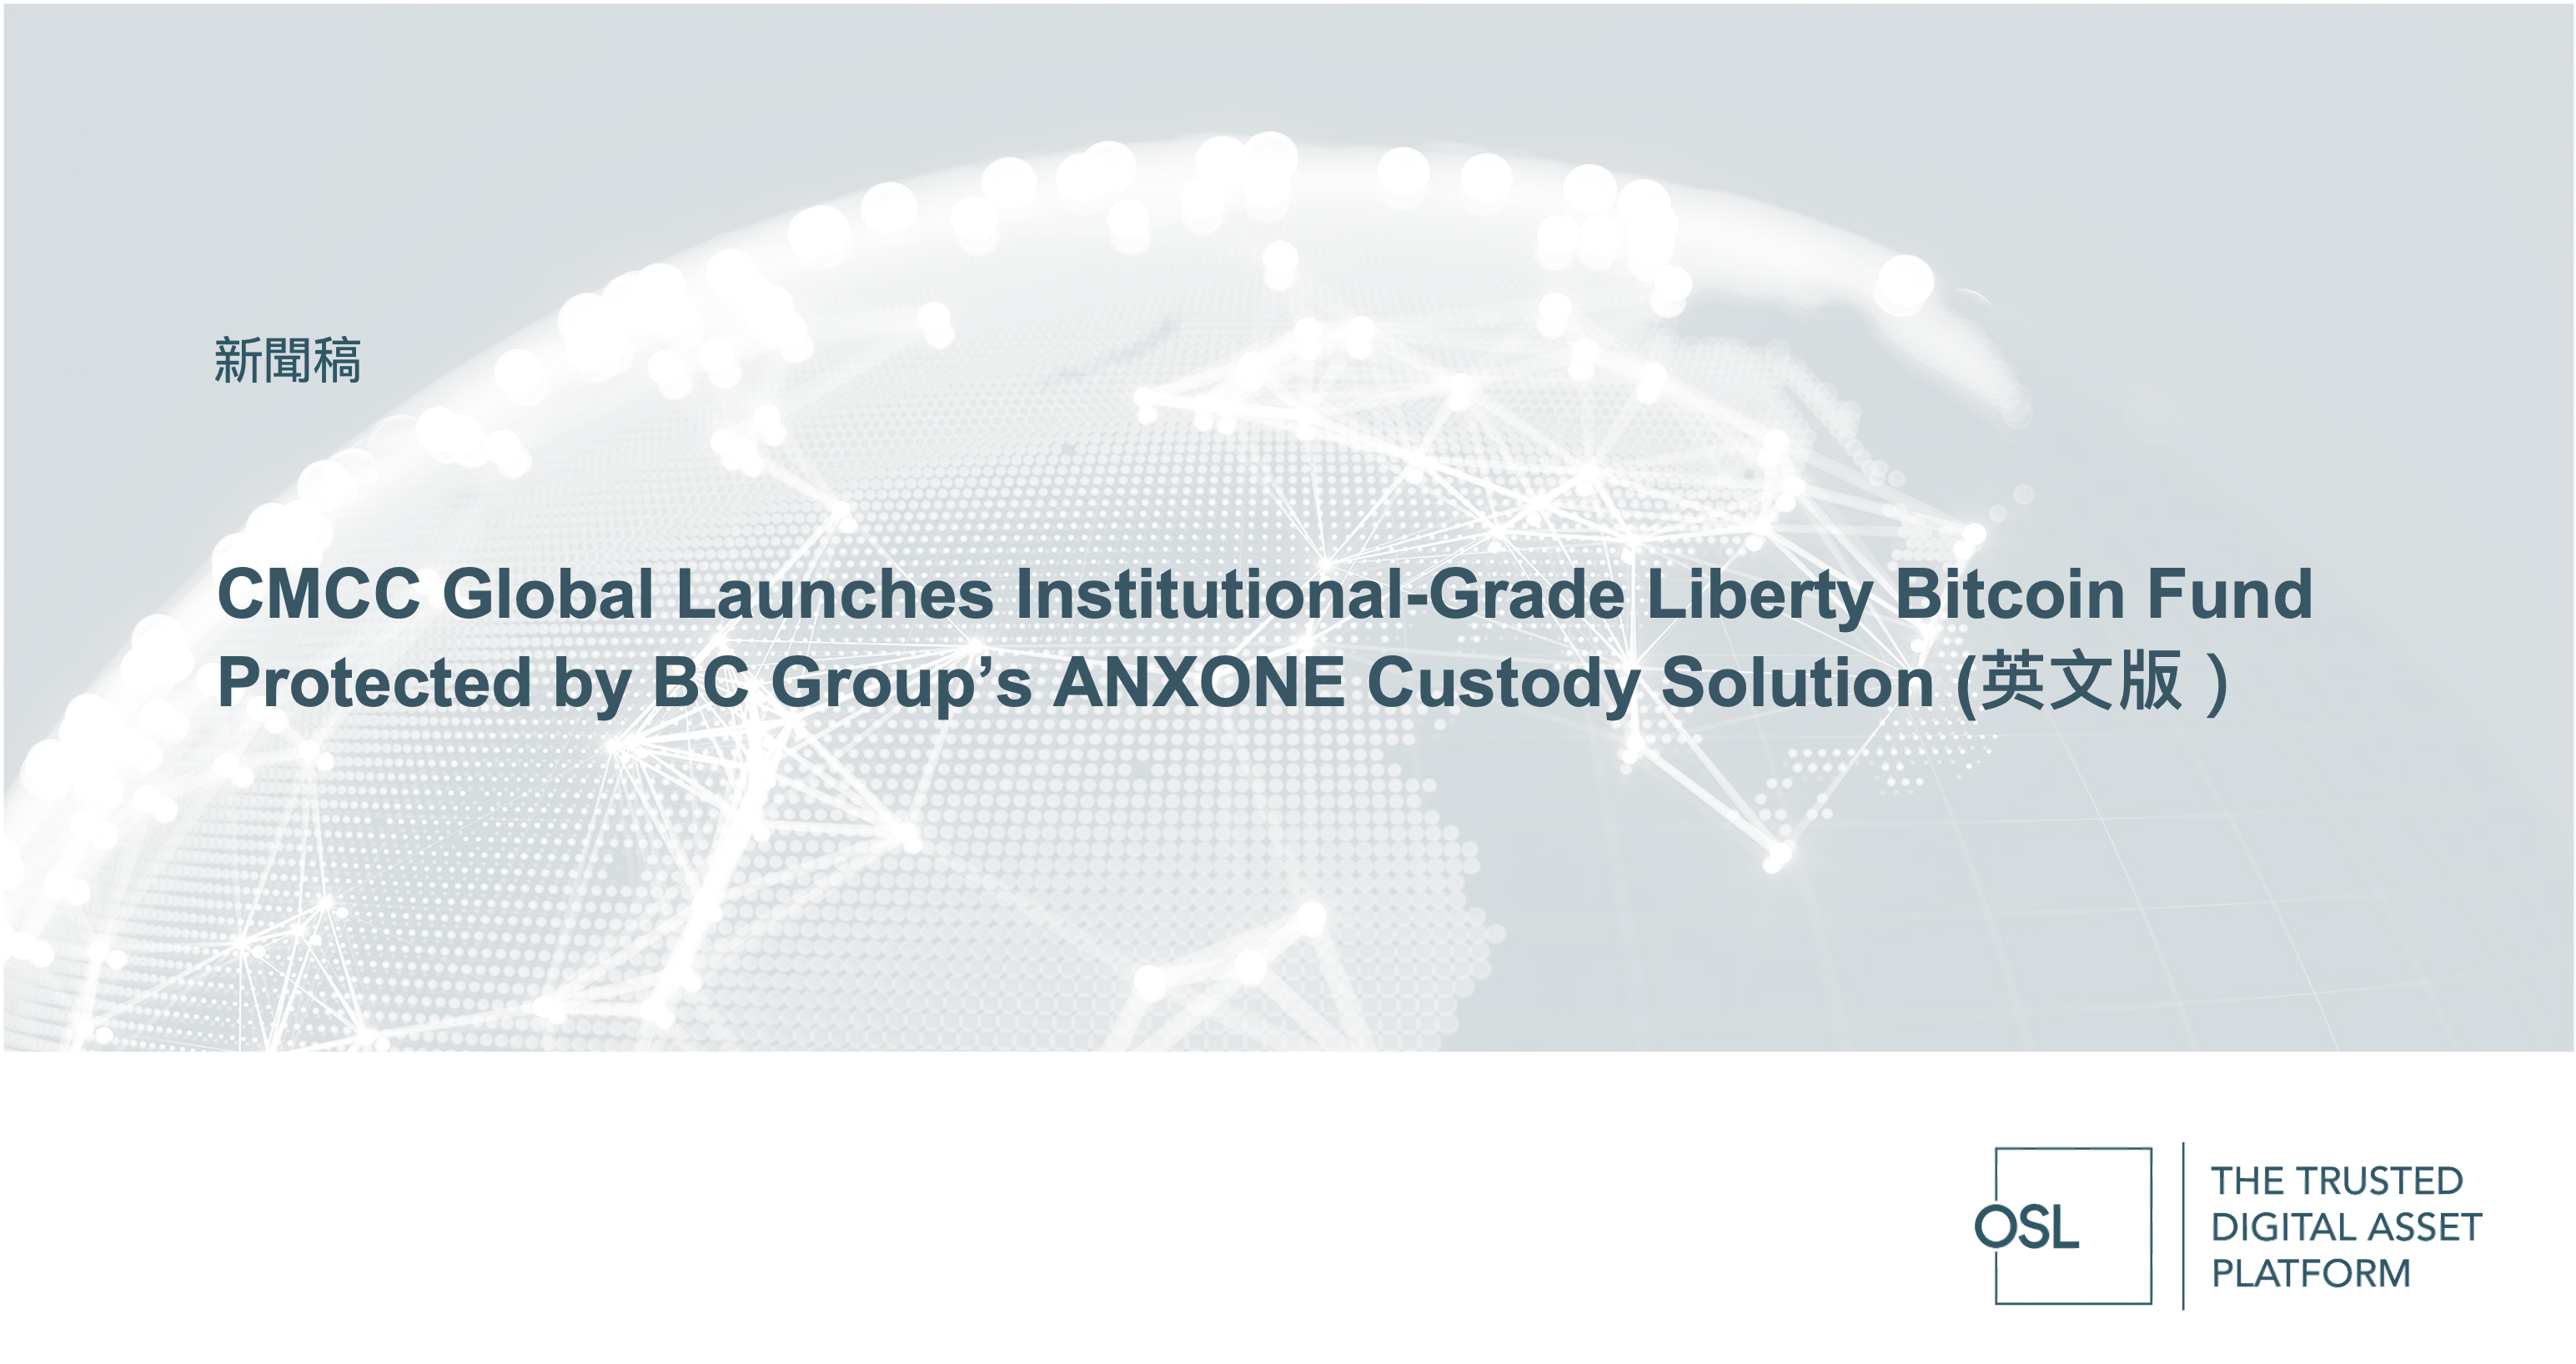 CMCC Global Launches Institutional-Grade Liberty Bitcoin Fund Protected by BC Group’s ANXONE Custody Solution